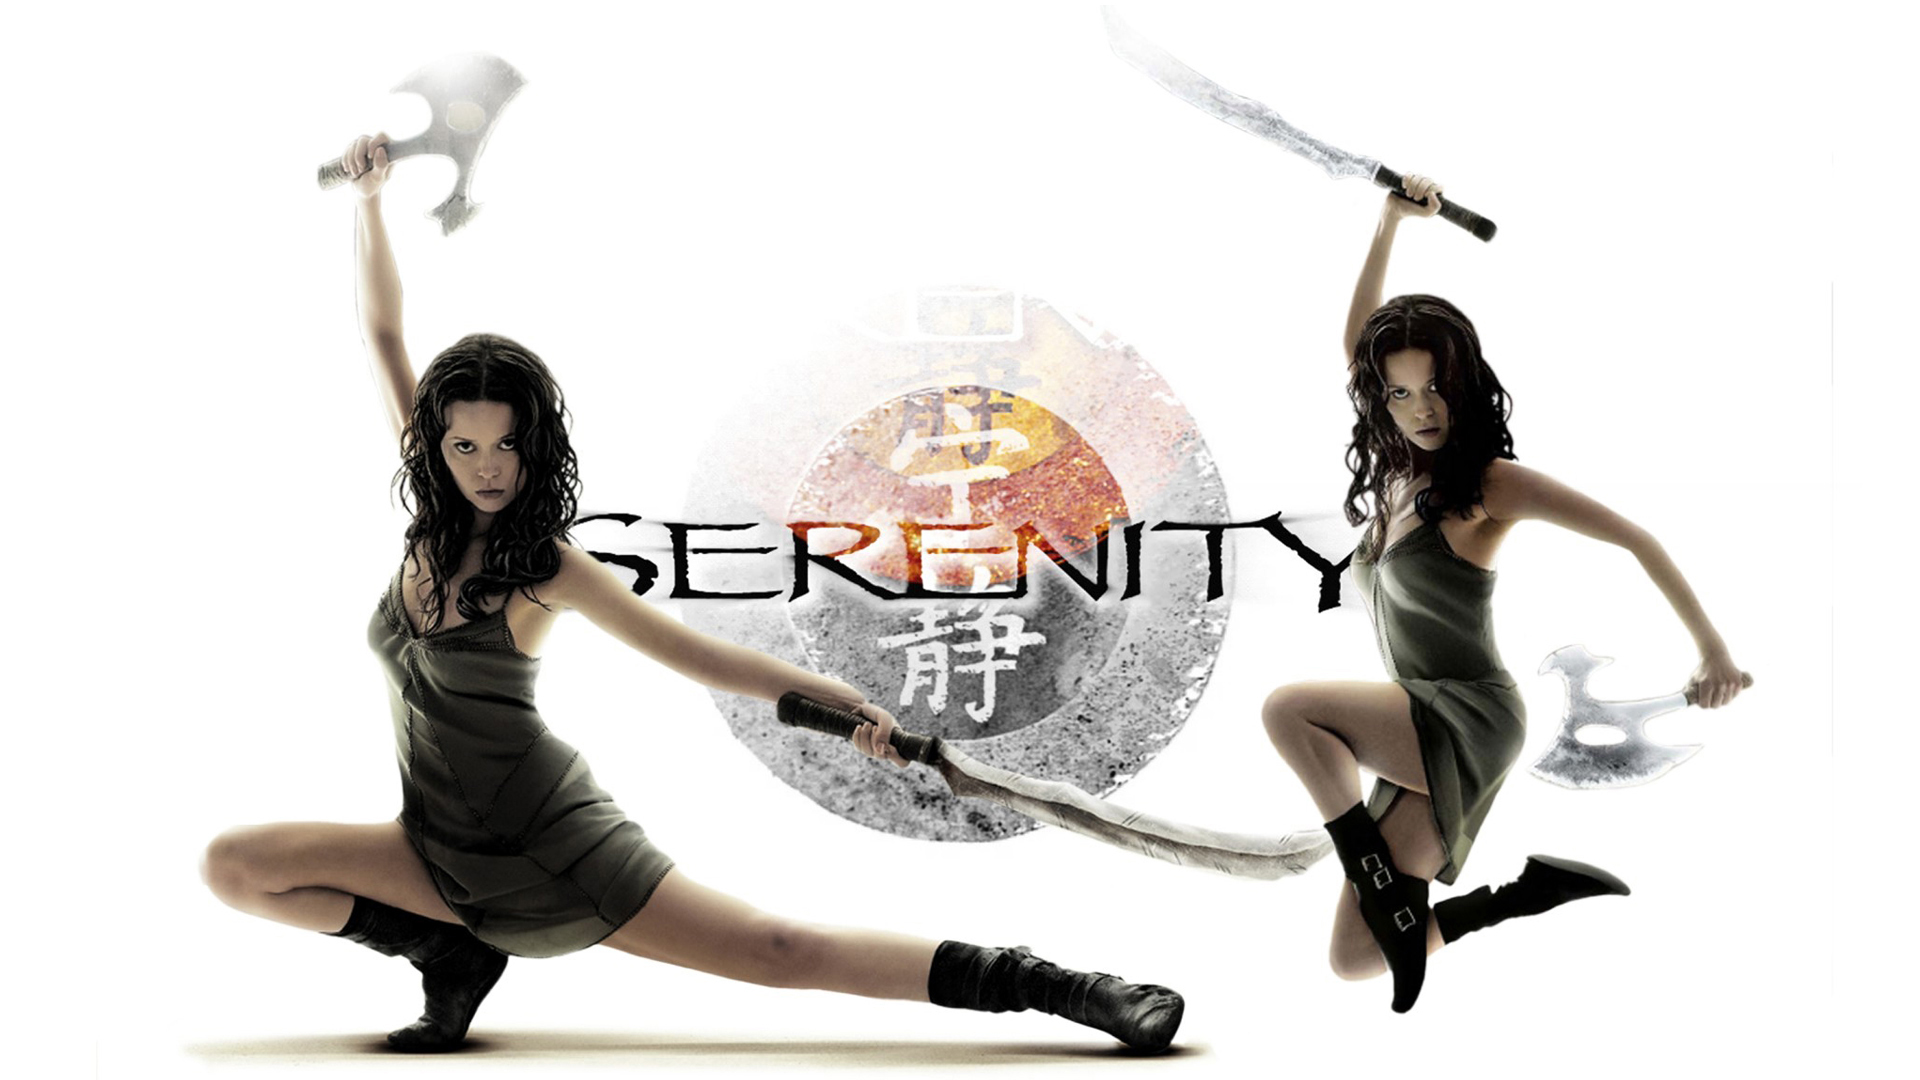 Serenity (2005) Wallpapers